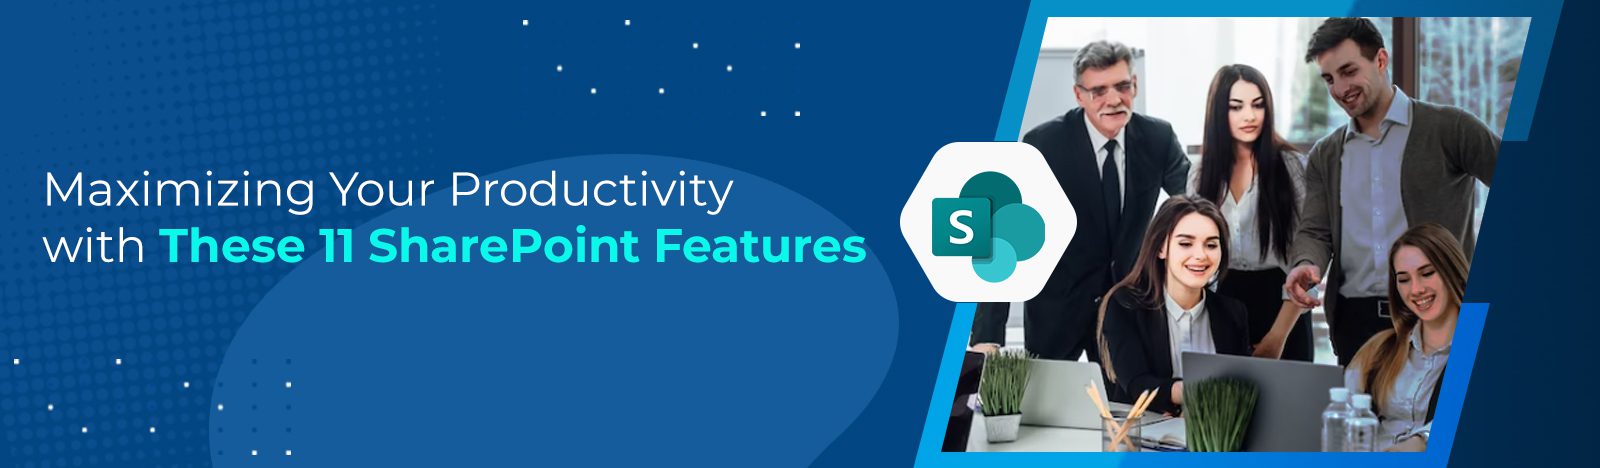 Maximizing Your Productivity with These 11 SharePoint Features